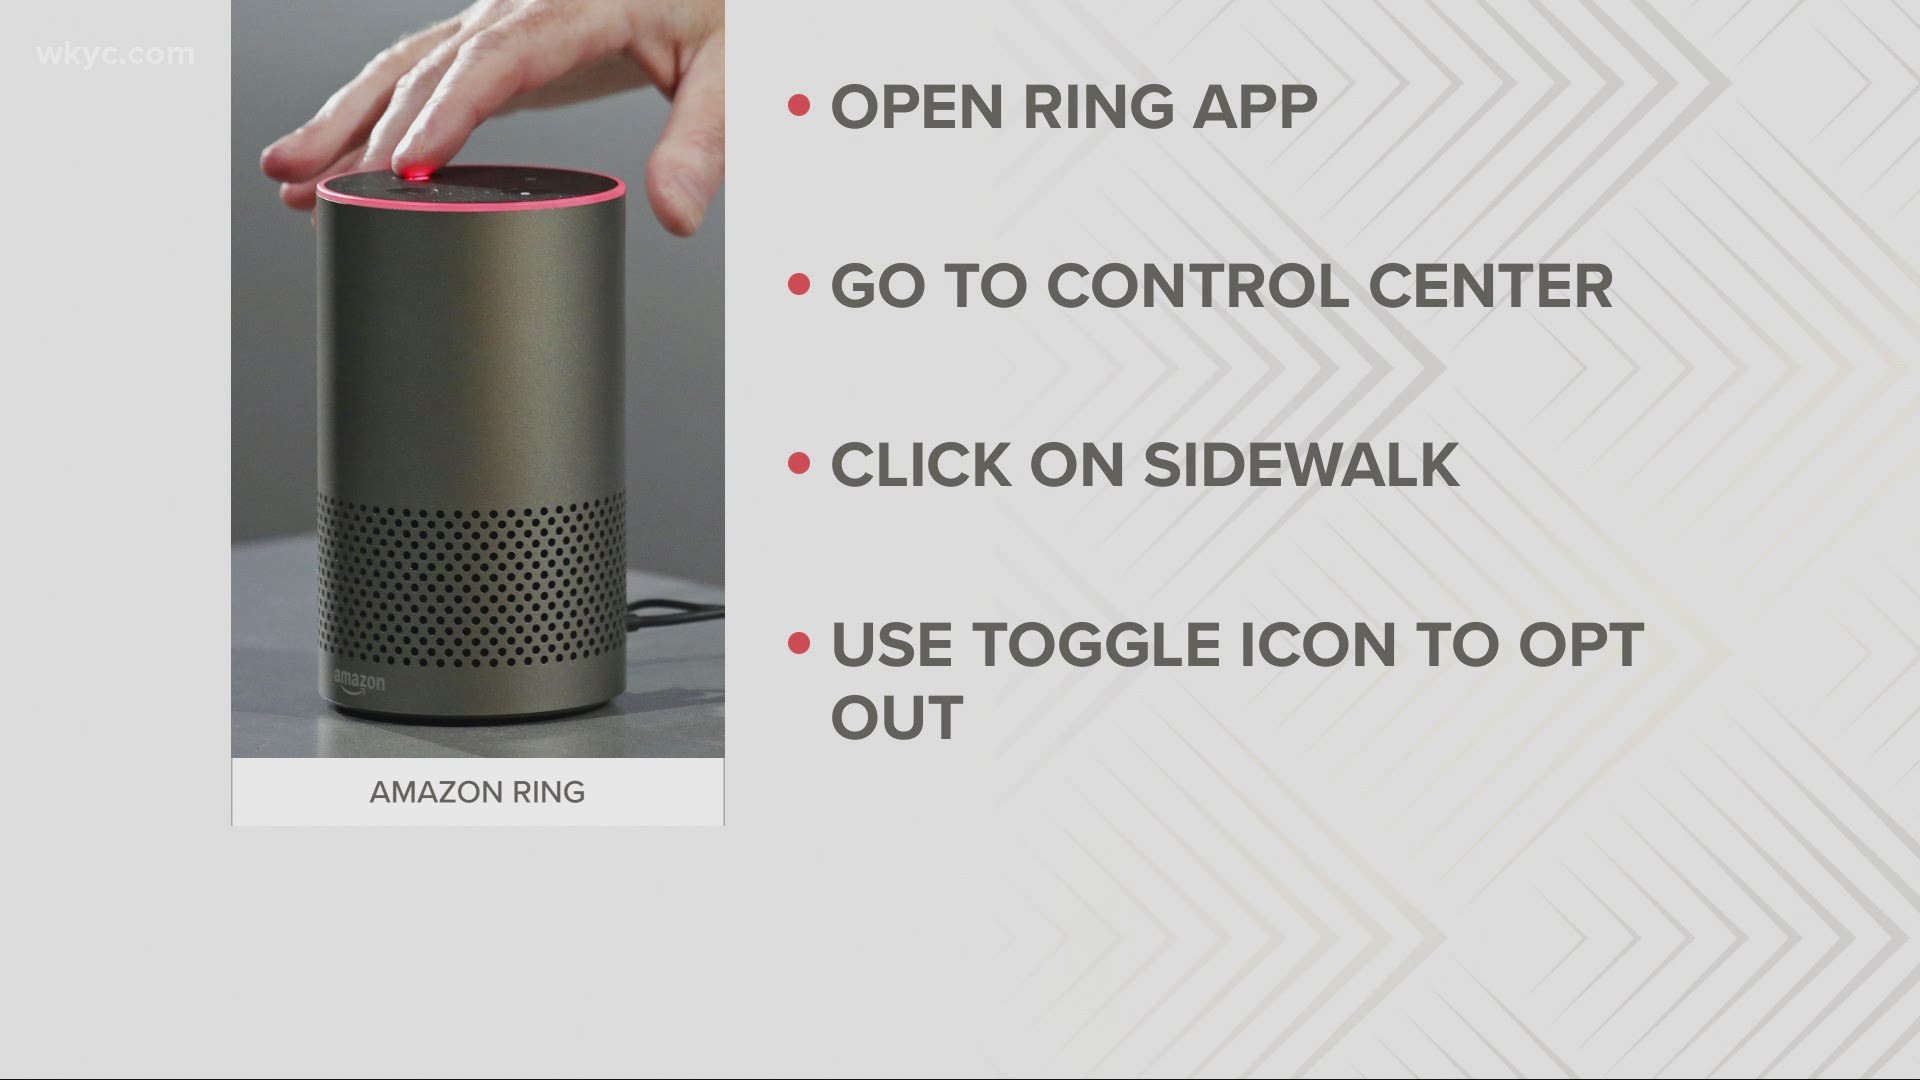 If you have an Amazon device or Ring camera, you've been automatically enrolled in Amazon Sidewalk WiFi connection sharing. Here's how you can opt out.